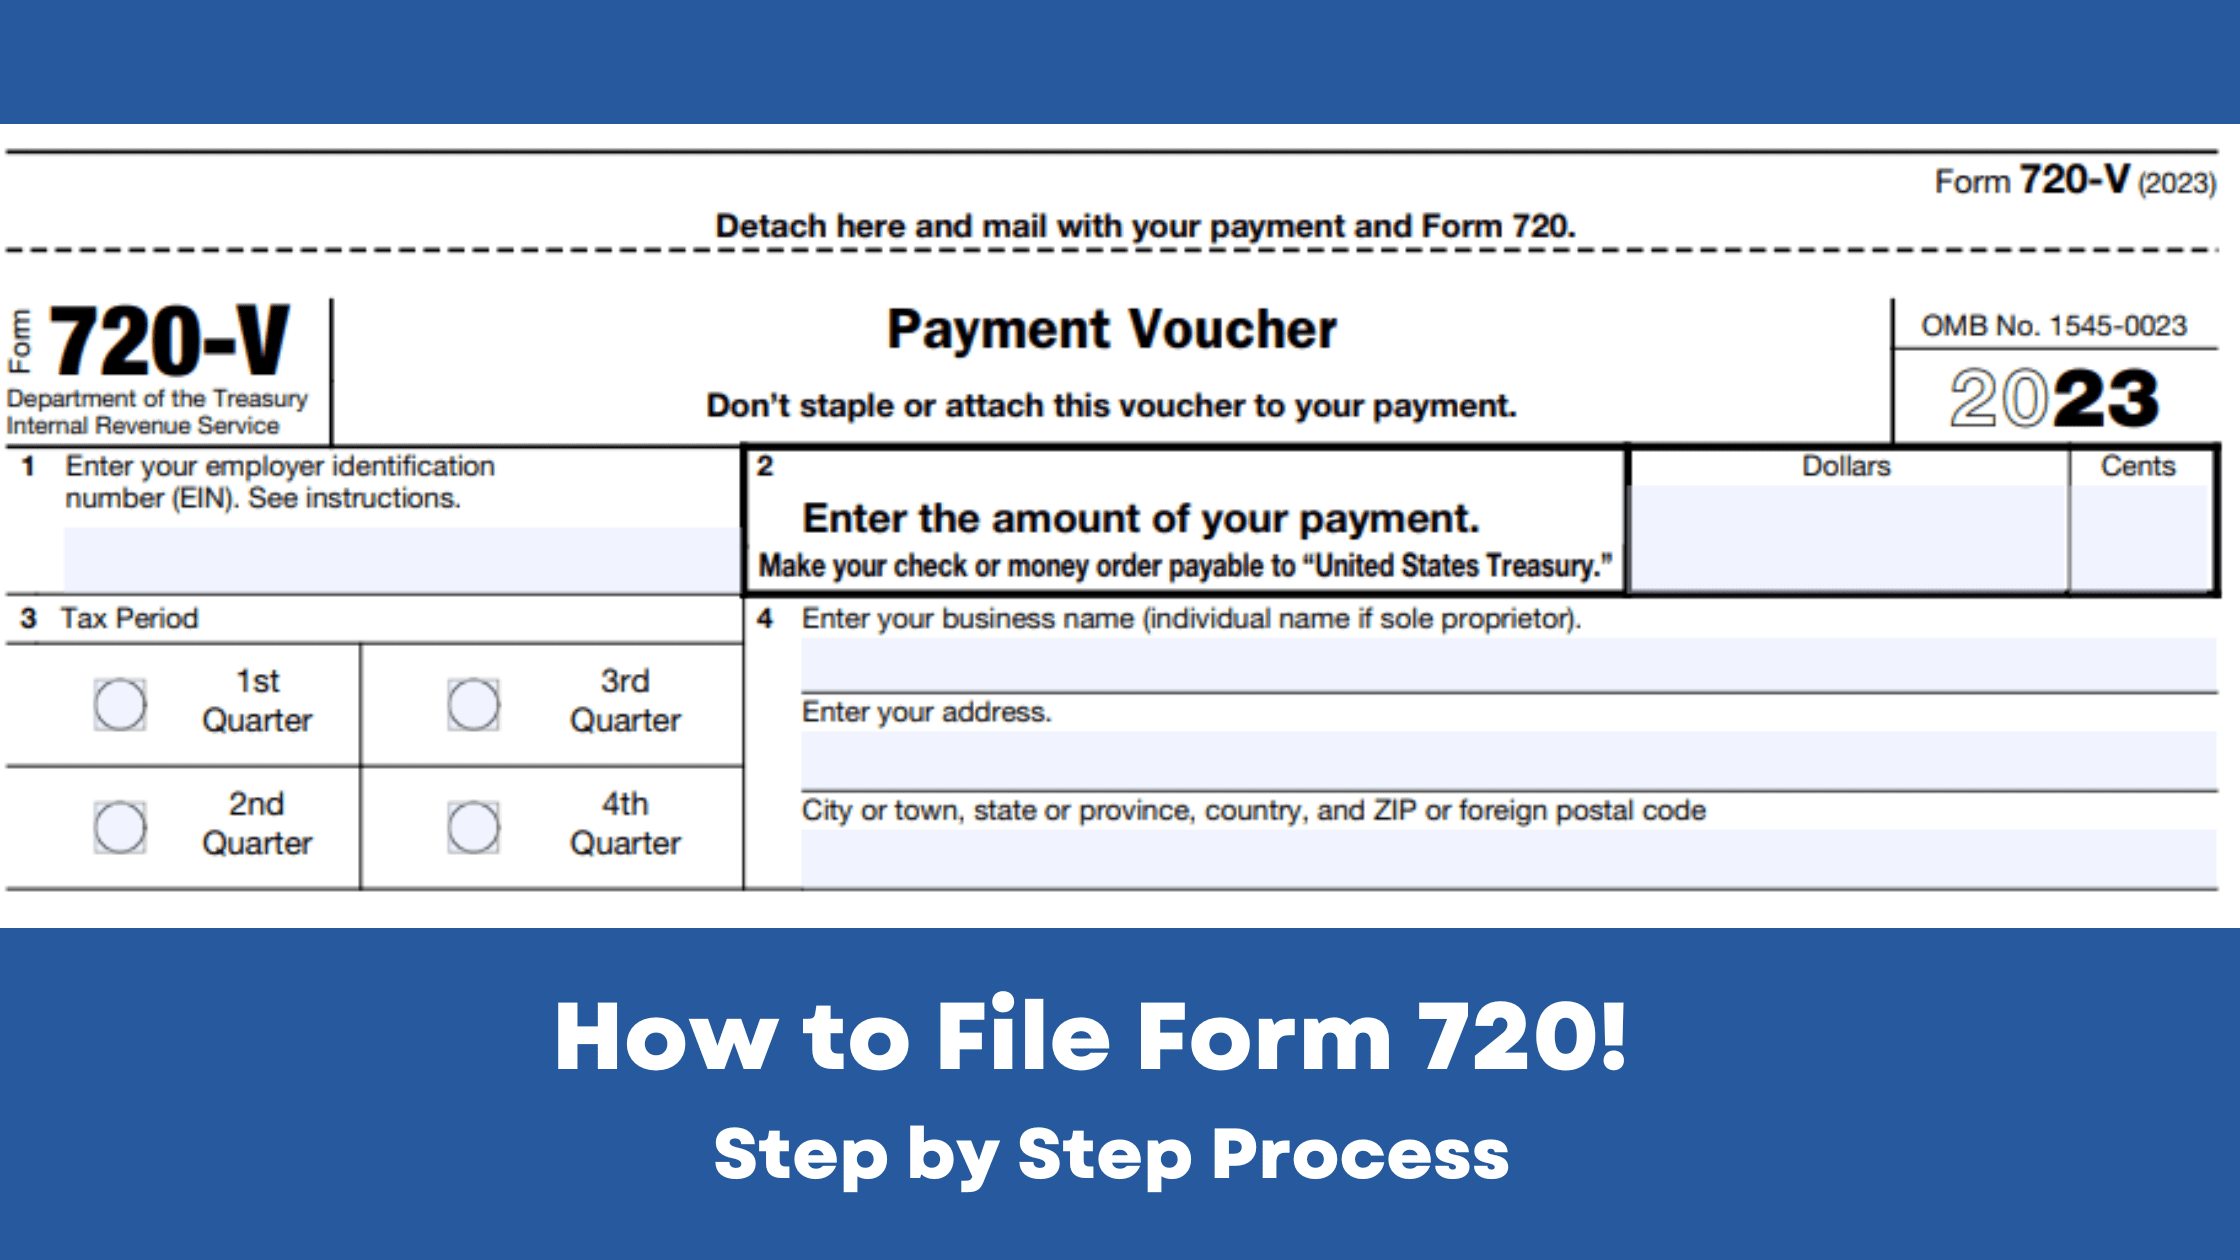 How to File Form 720 V for a Seamless Excise Tax Filing?